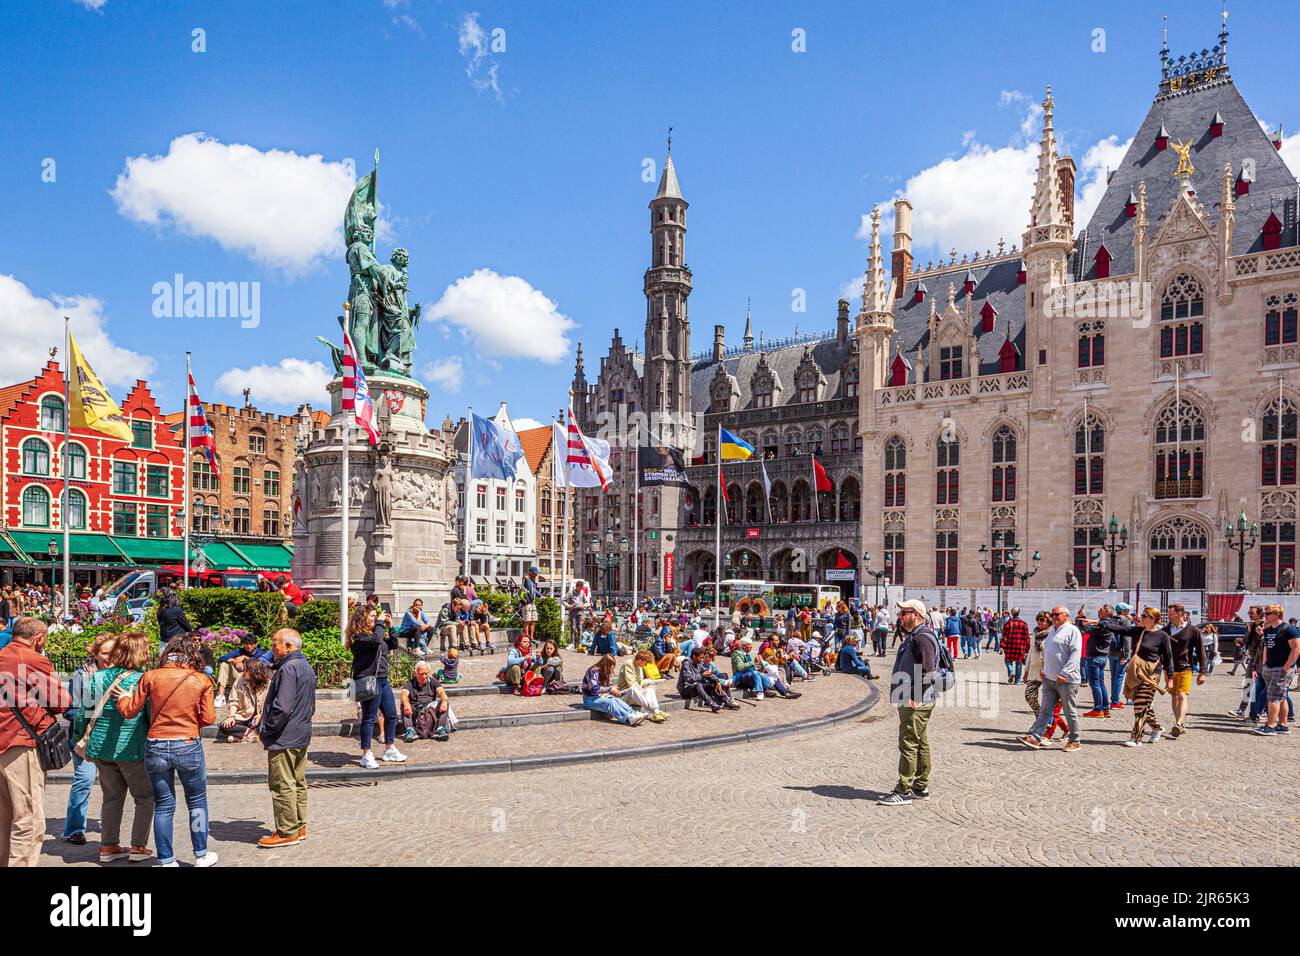 The statues of Jan Breydel and Pieter de Coninck and the The Provinciaal Hof (Province Court) in the Markt Square in Bruges, Belgium Stock Photo